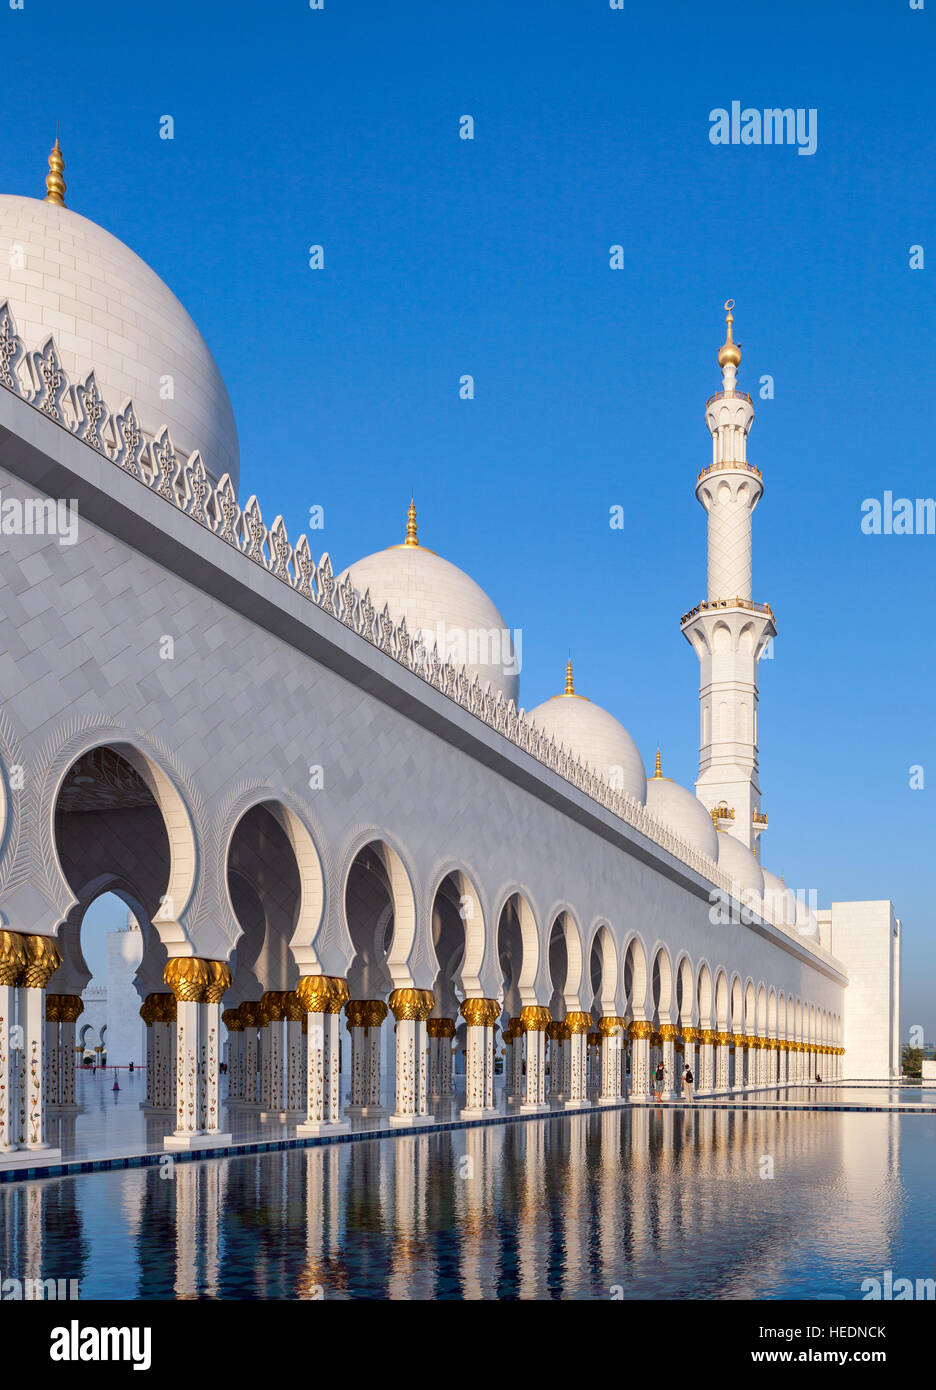 The mosque is named after Sheikh Zayed Bin Sultan Al Nayhan, the late ruler and founder of the United Arab Emirates,. Stock Photo